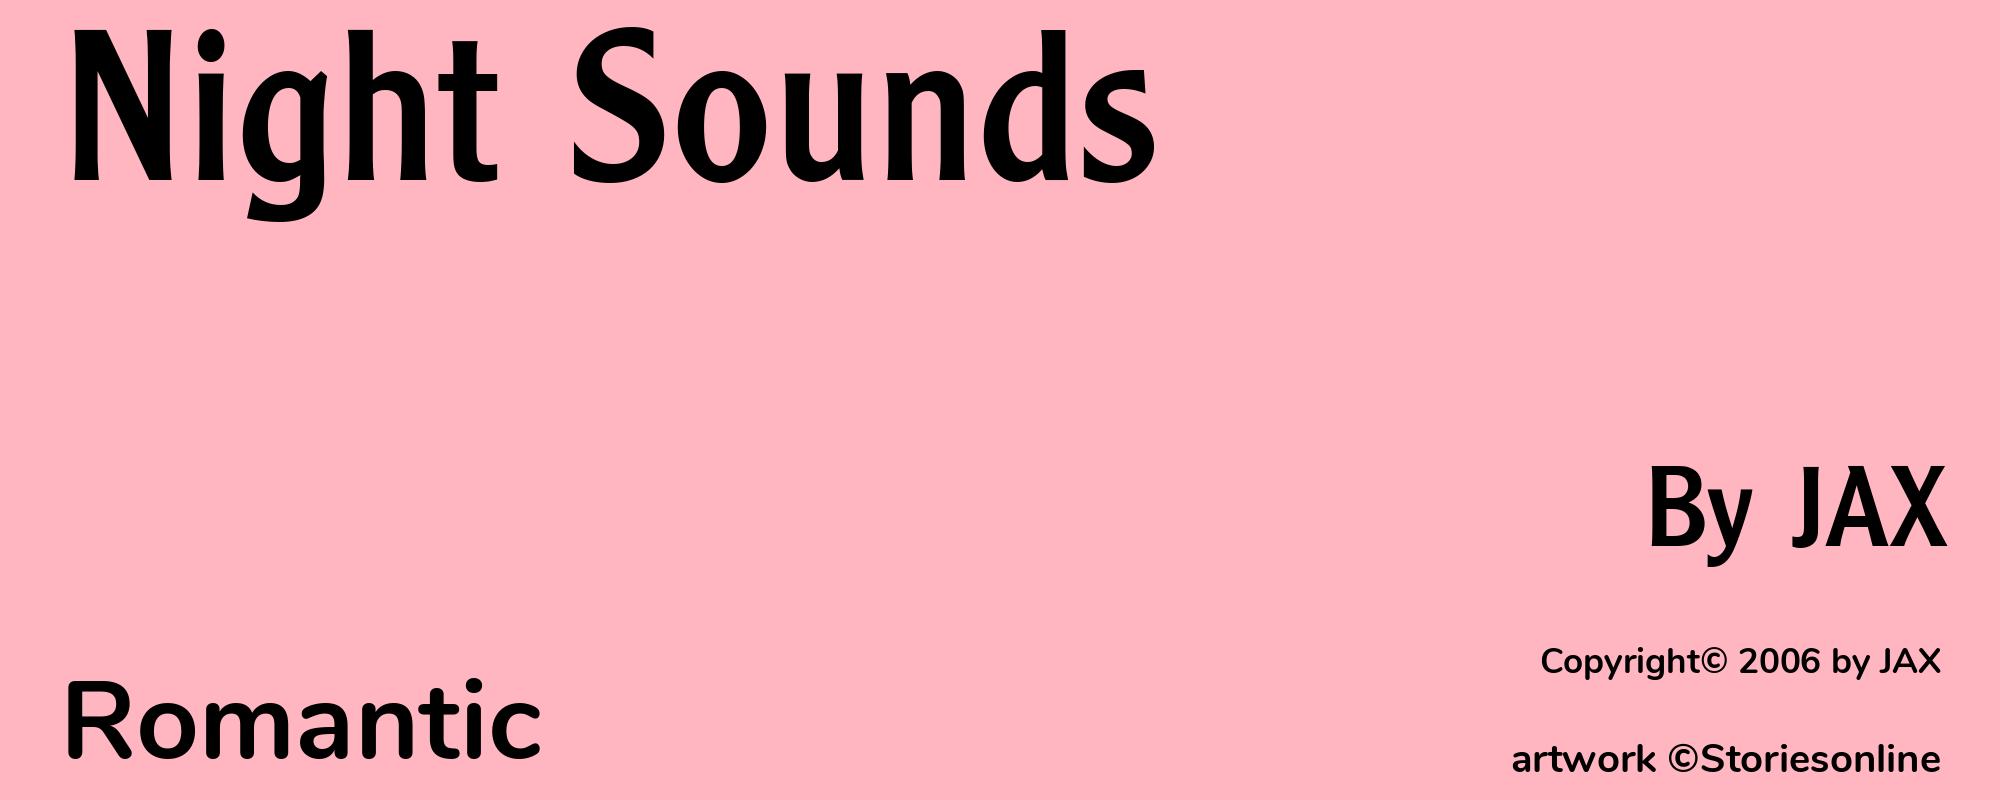 Night Sounds - Cover